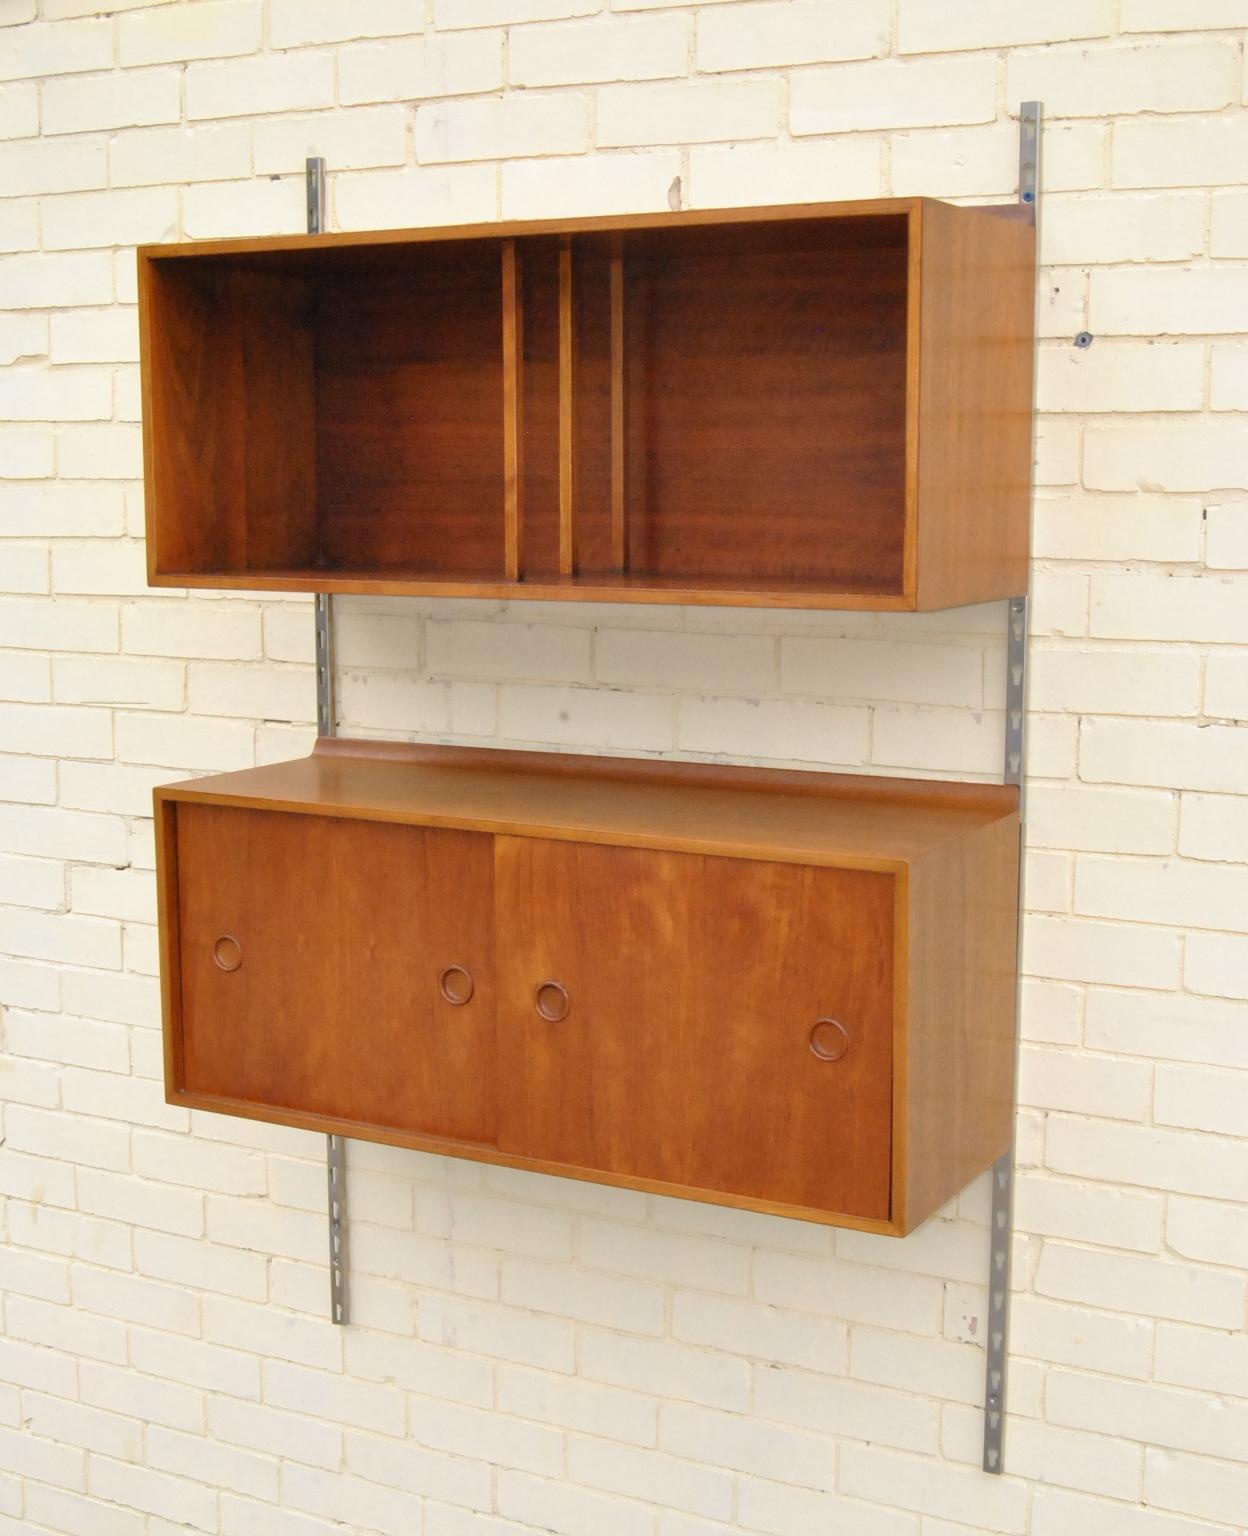 Baker Finn Juhl adjustable modular wall unit, circa 1950s. Can be positioned vertically or horizontal. Each unit measures 32